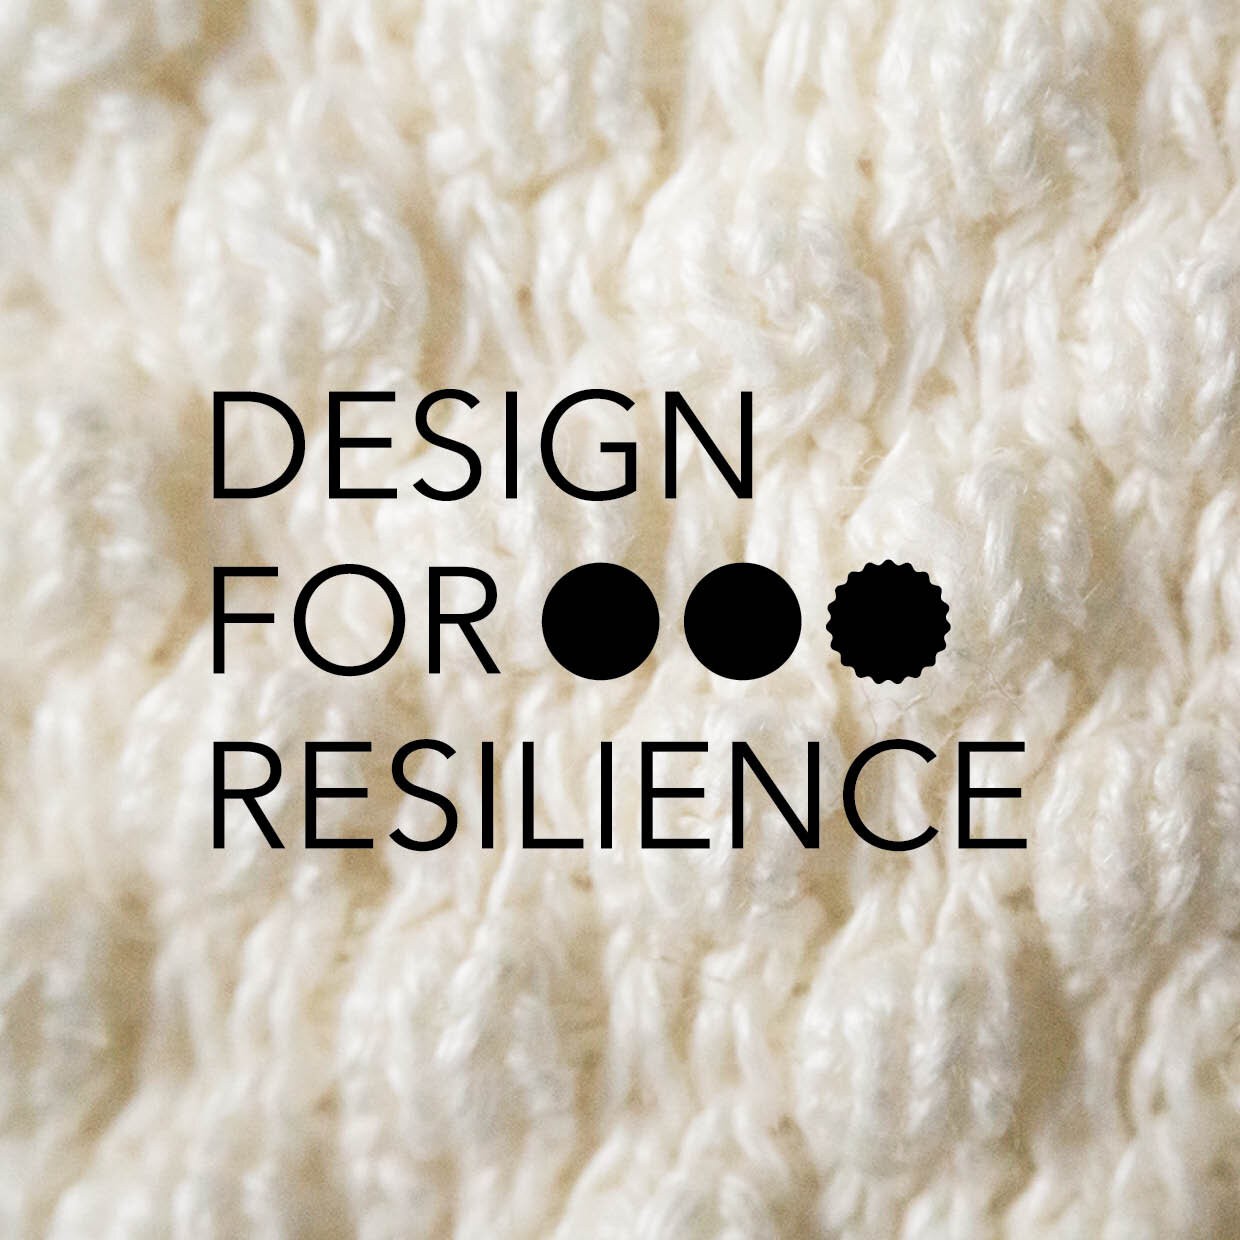 Design for resilience